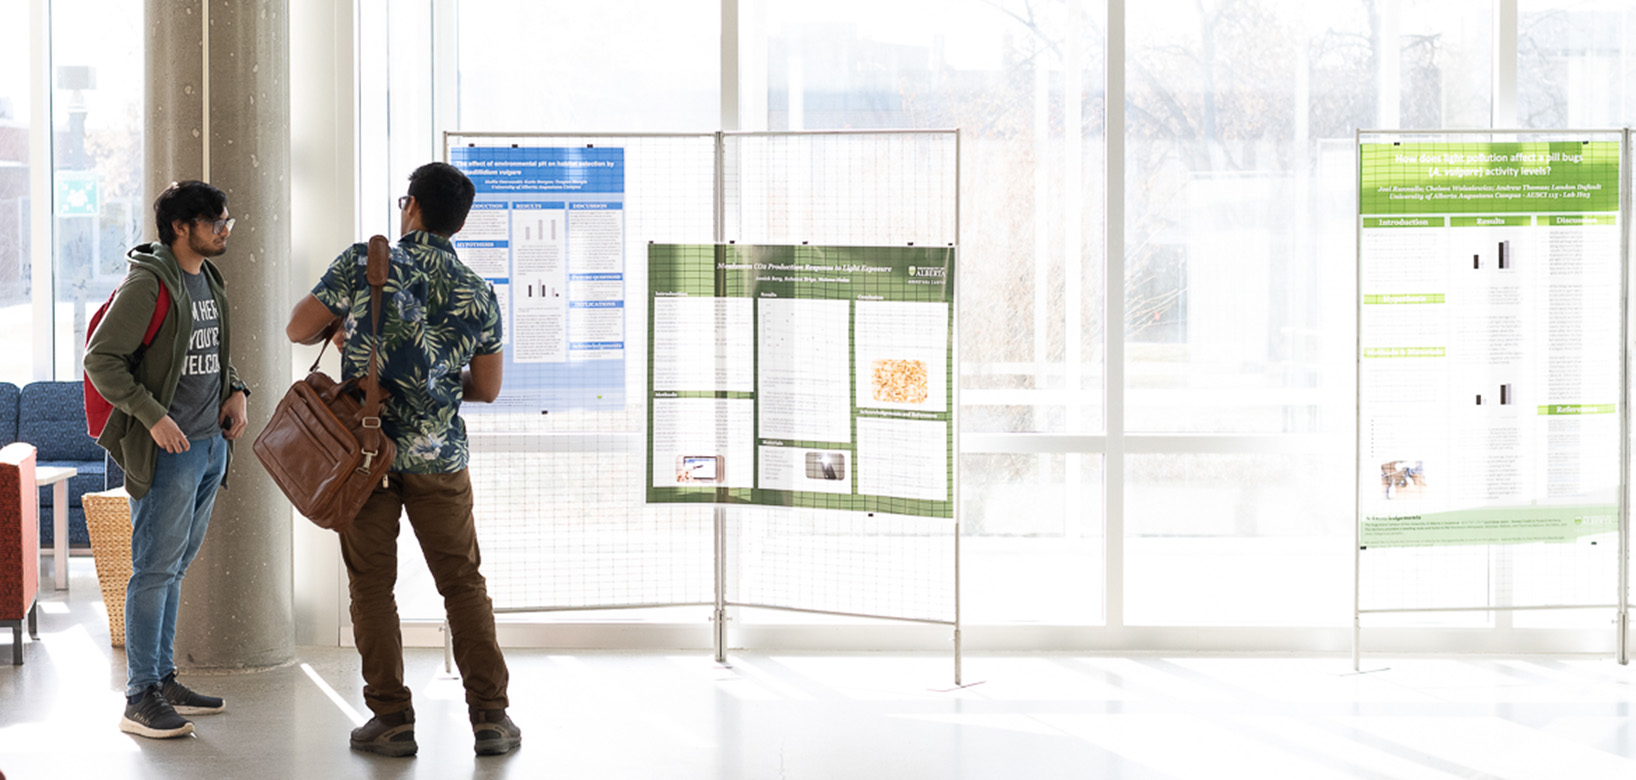 Two students standing in an open, brightly lit building in front of display panels that have research posters on them.